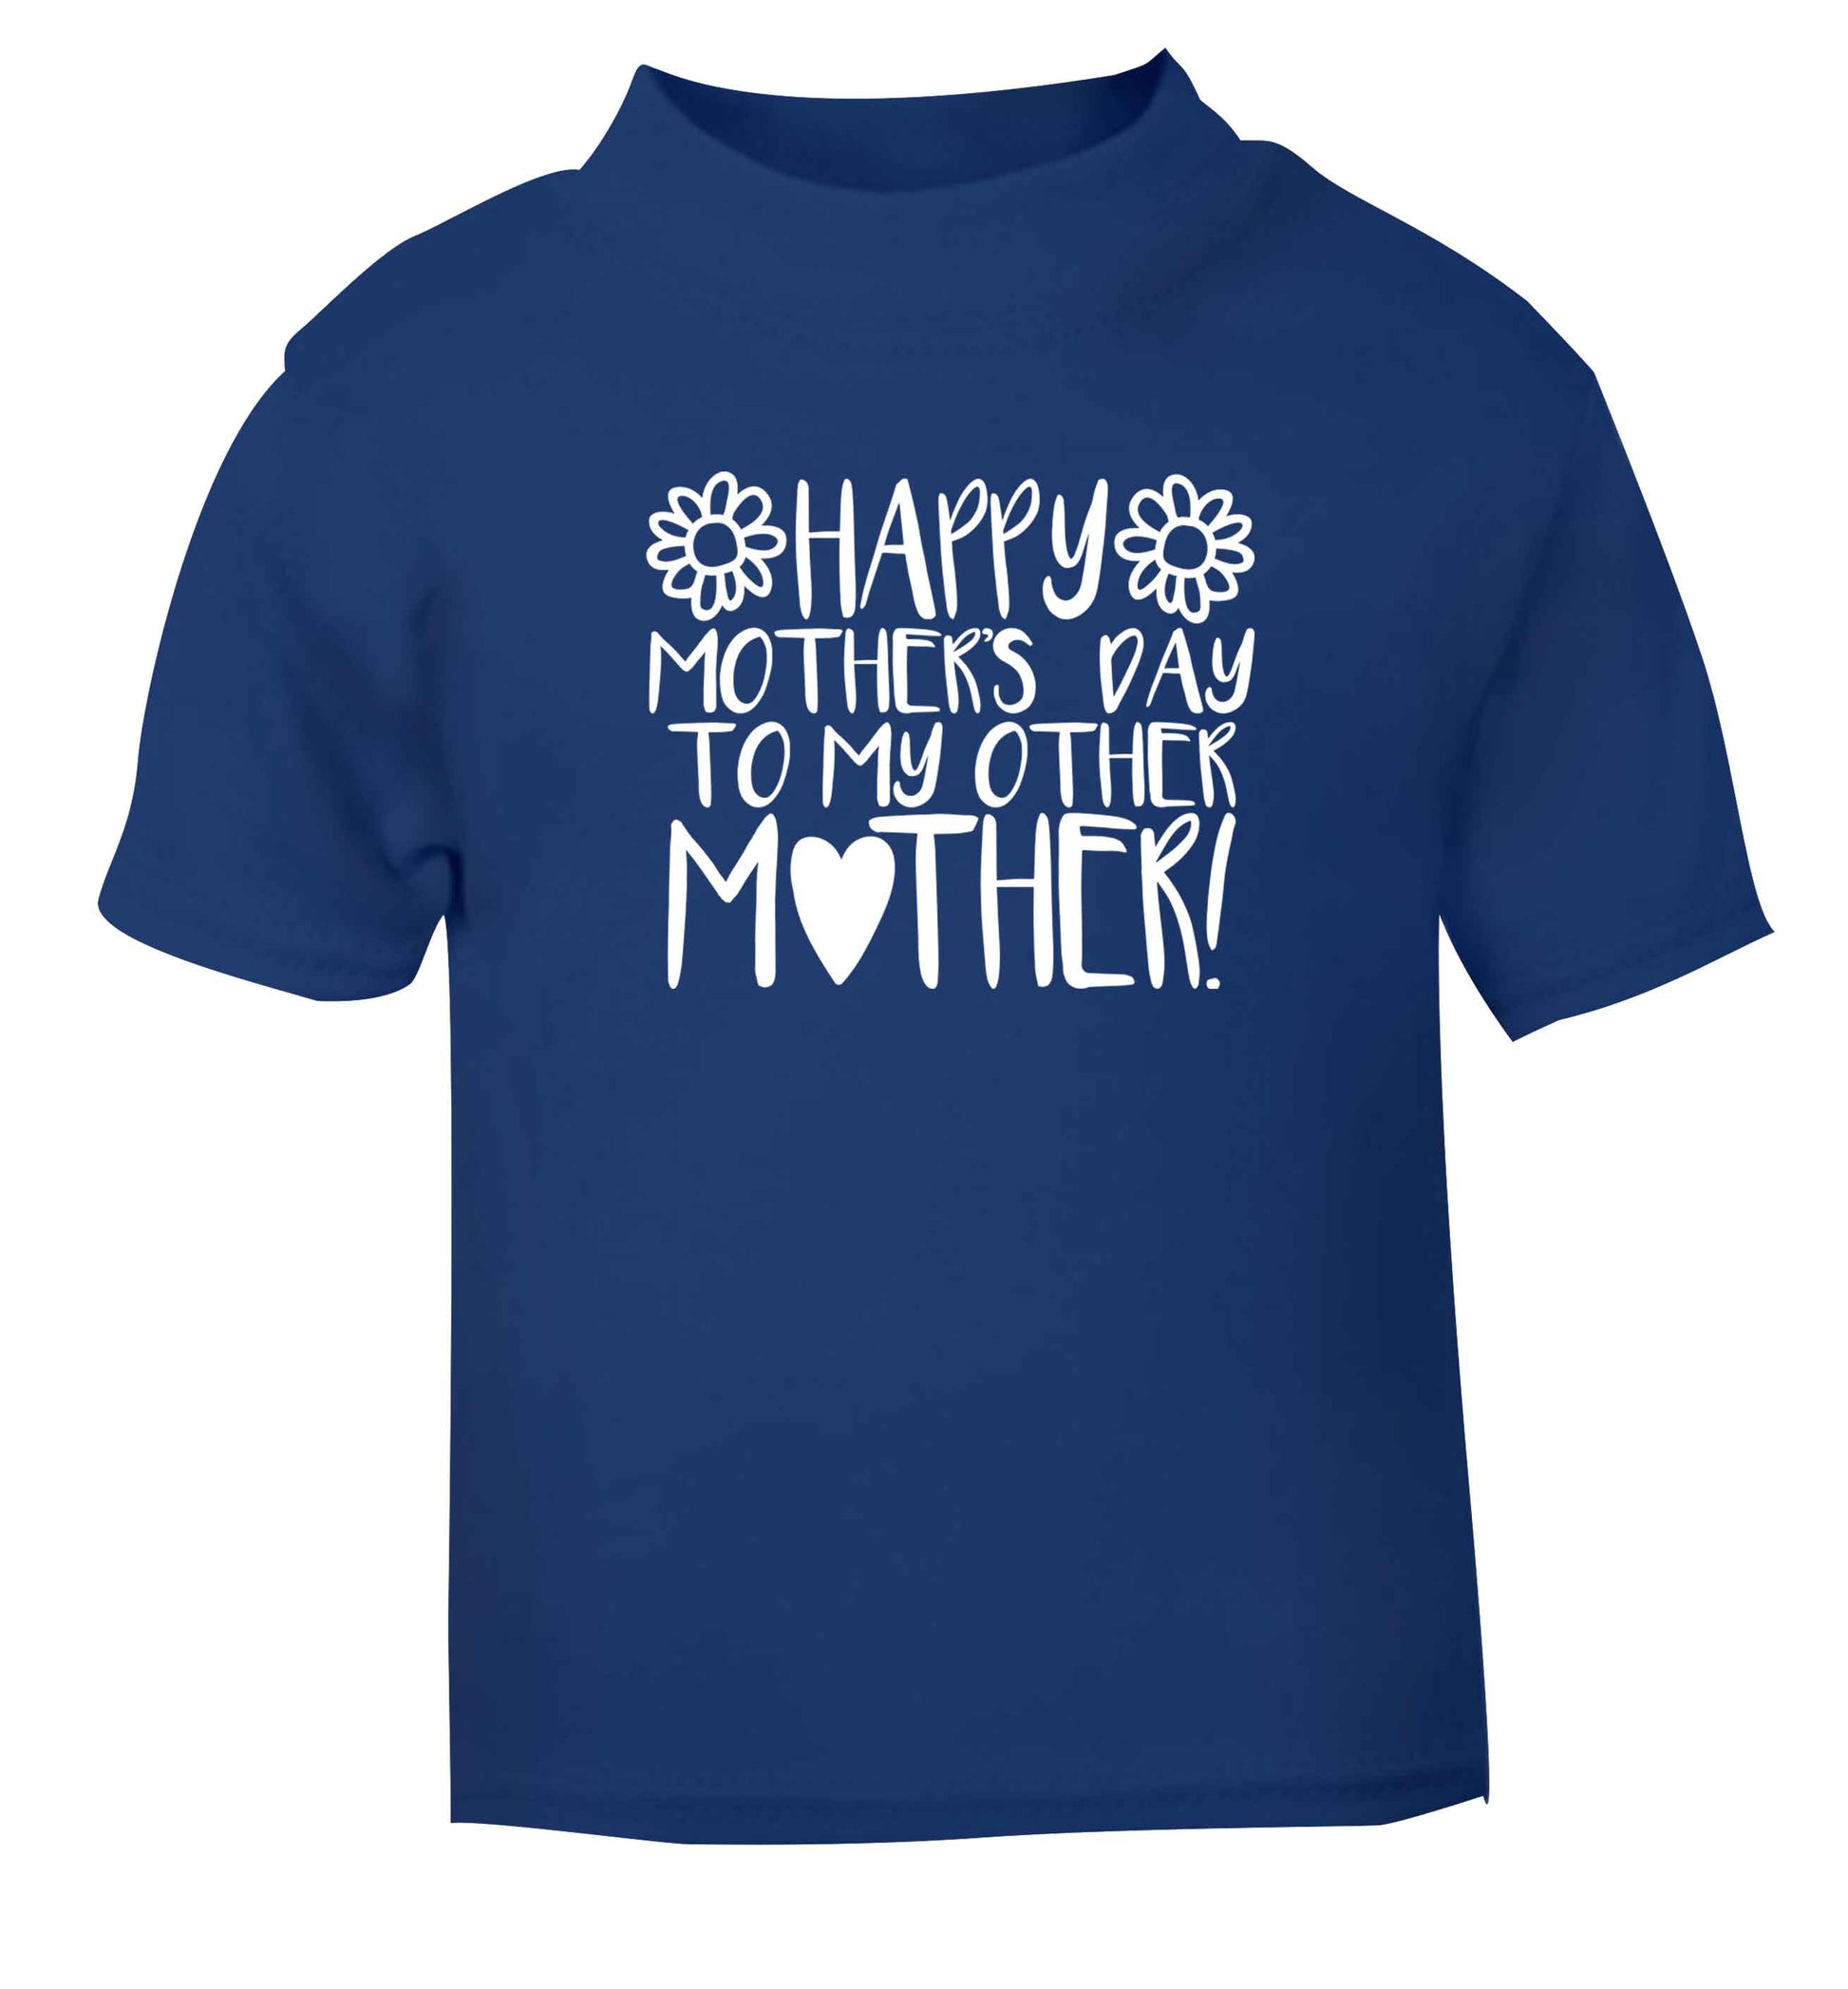 Happy mother's day to my other mother blue baby toddler Tshirt 2 Years